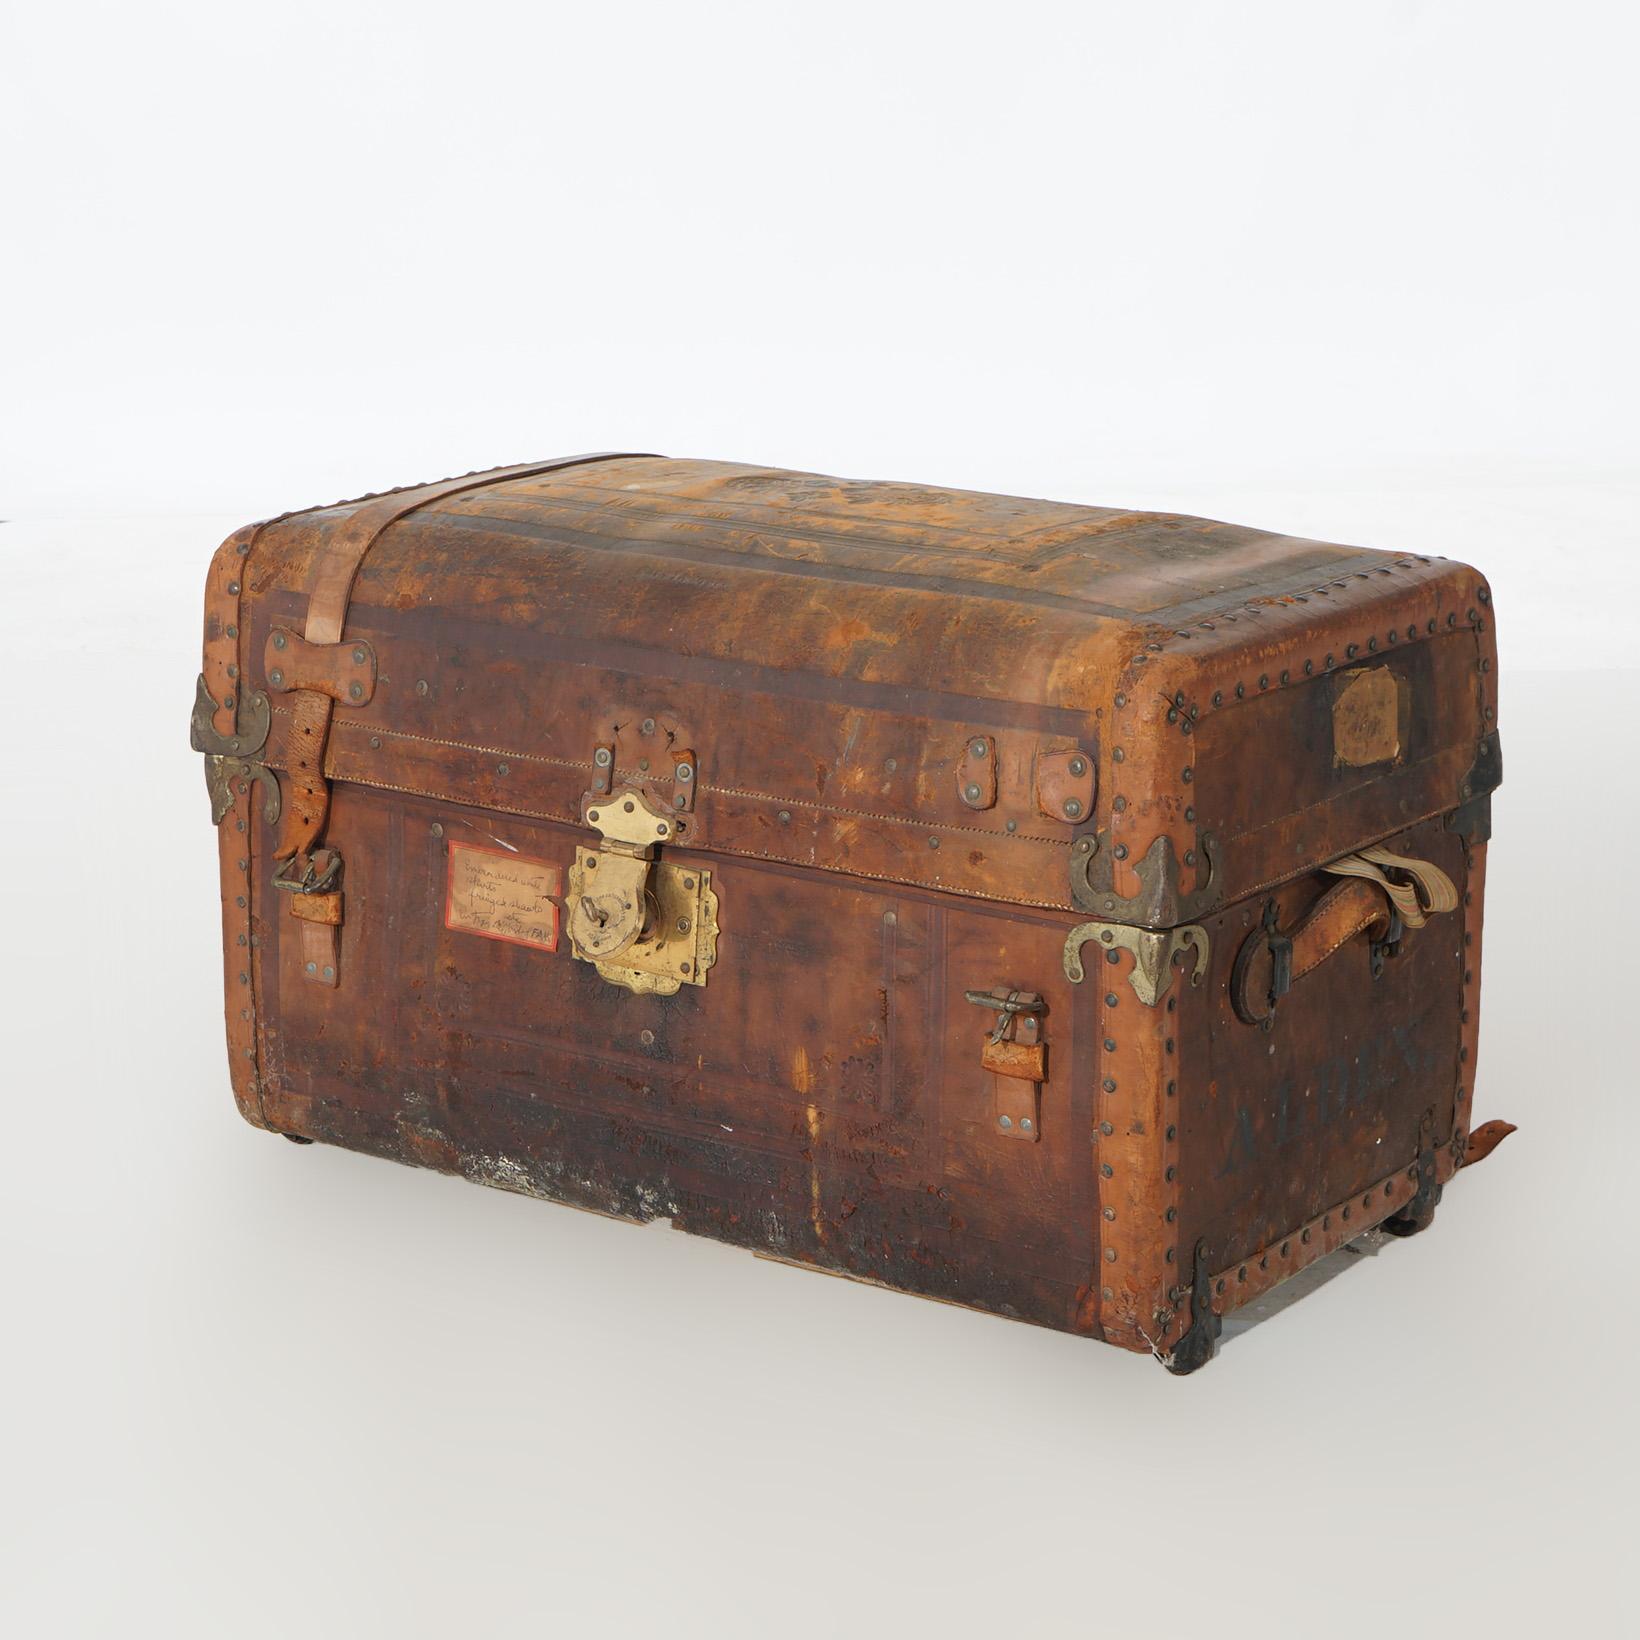 Antique Leather Travel Trunk or Suitcase, 19th C

Measures - 20